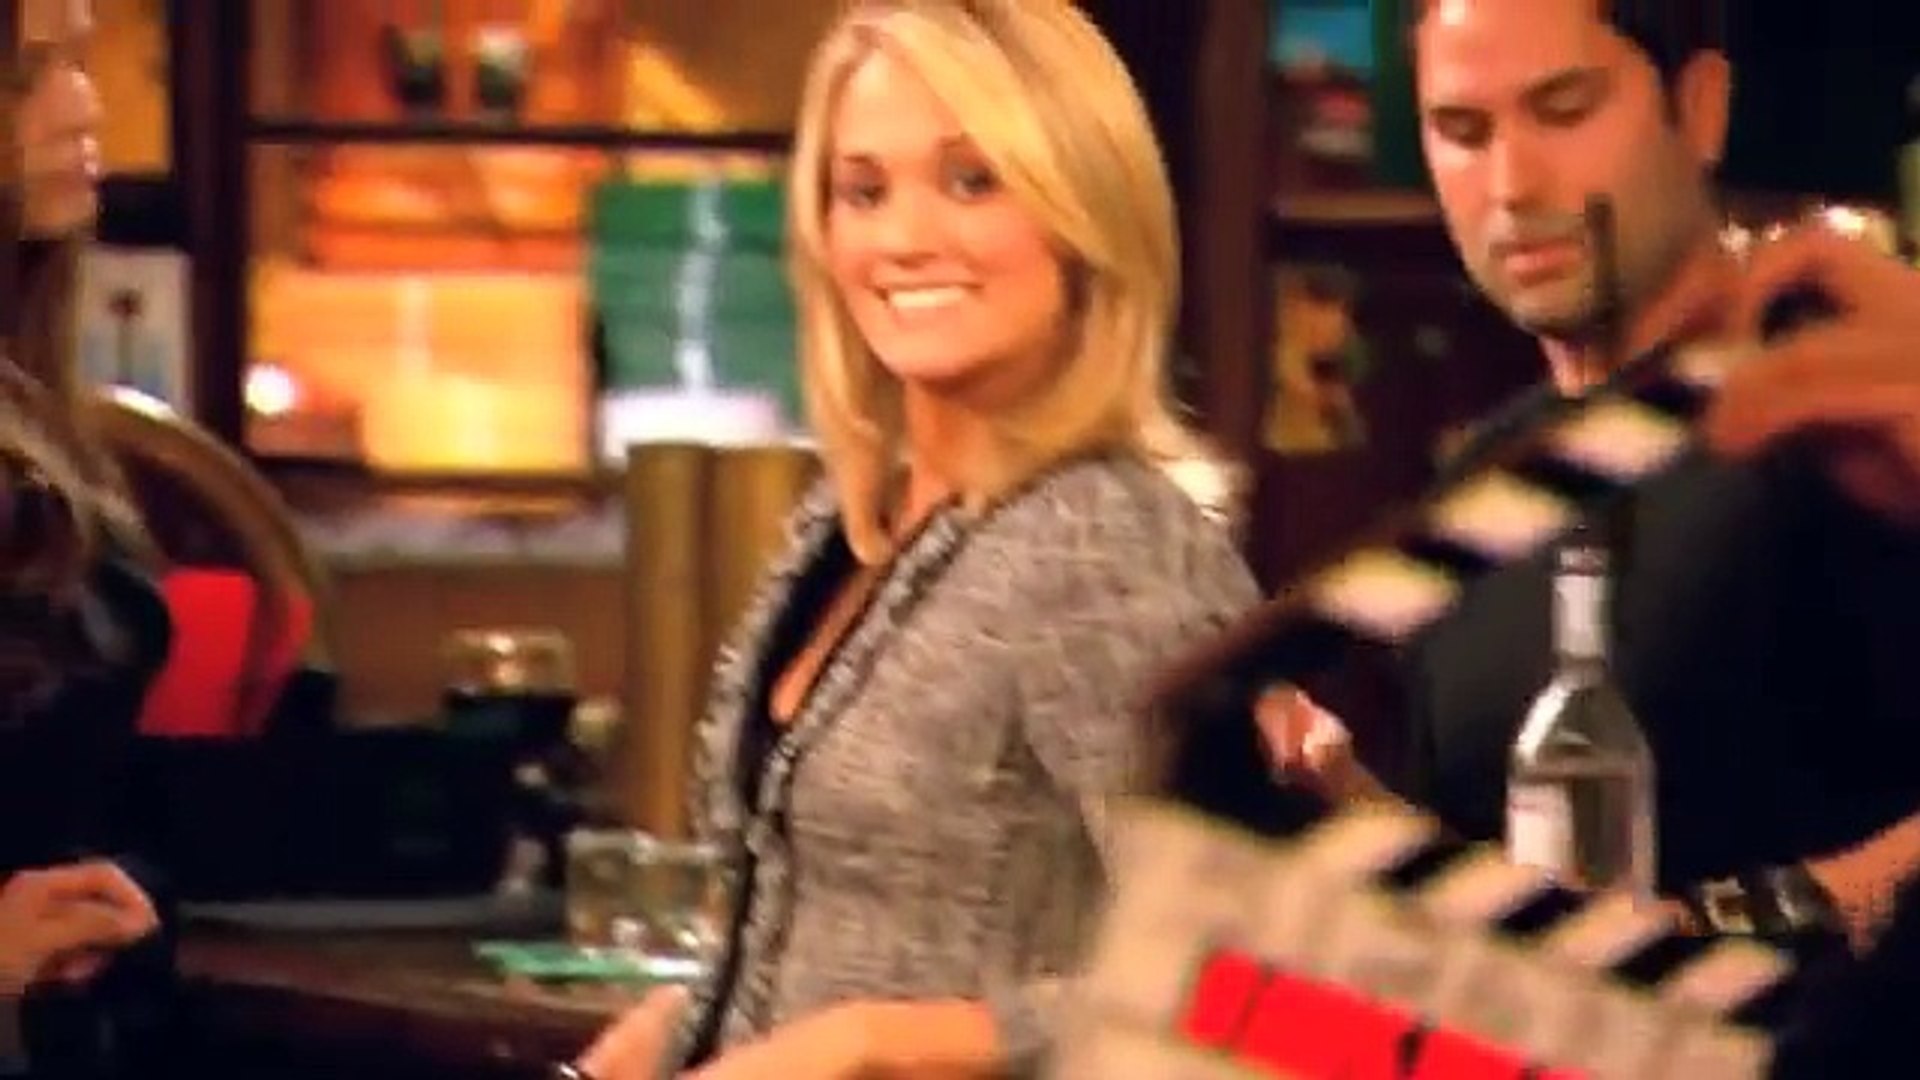 How I Met Your Mother - Carrie Underwood - video Dailymotion